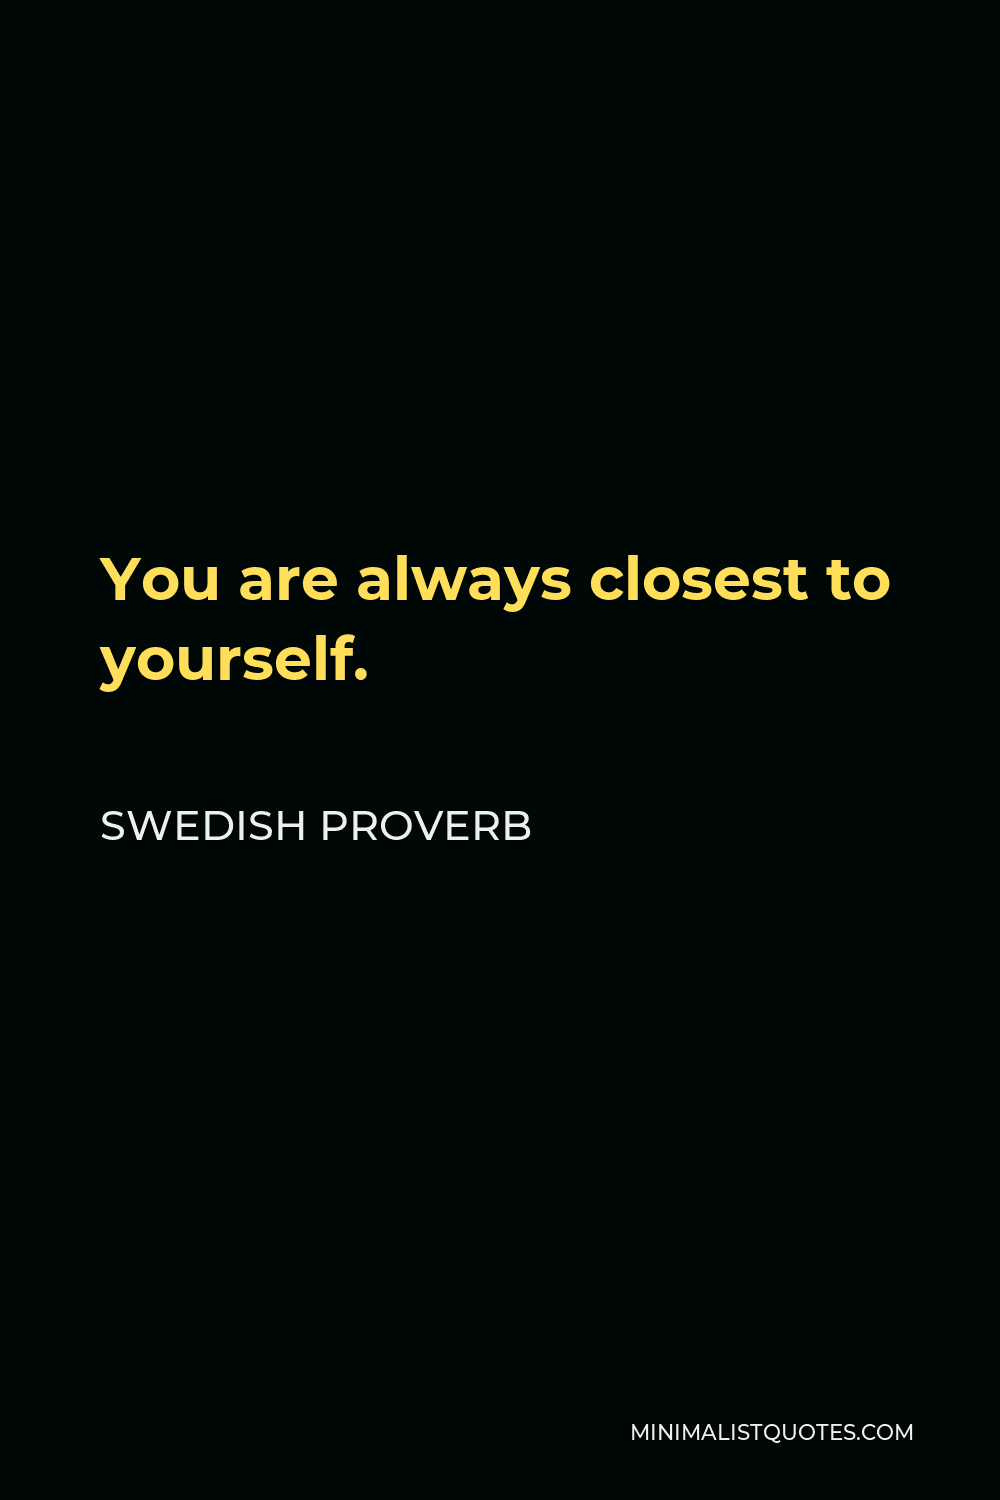 Swedish Proverb Quote - You are always closest to yourself.